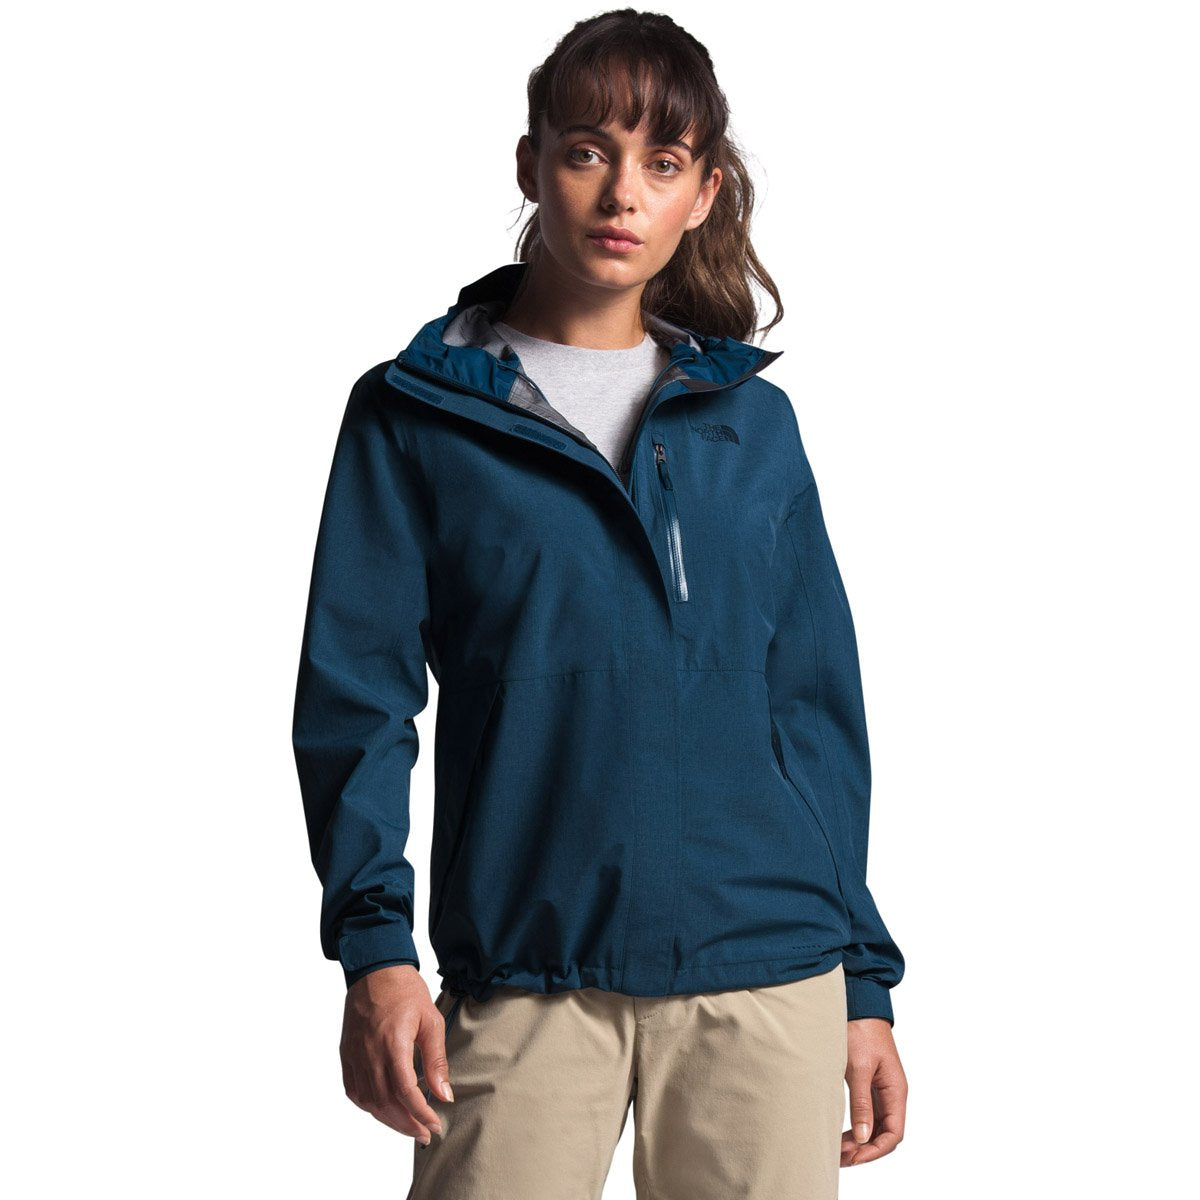 The North Face Flght Wind Women's Jacket White